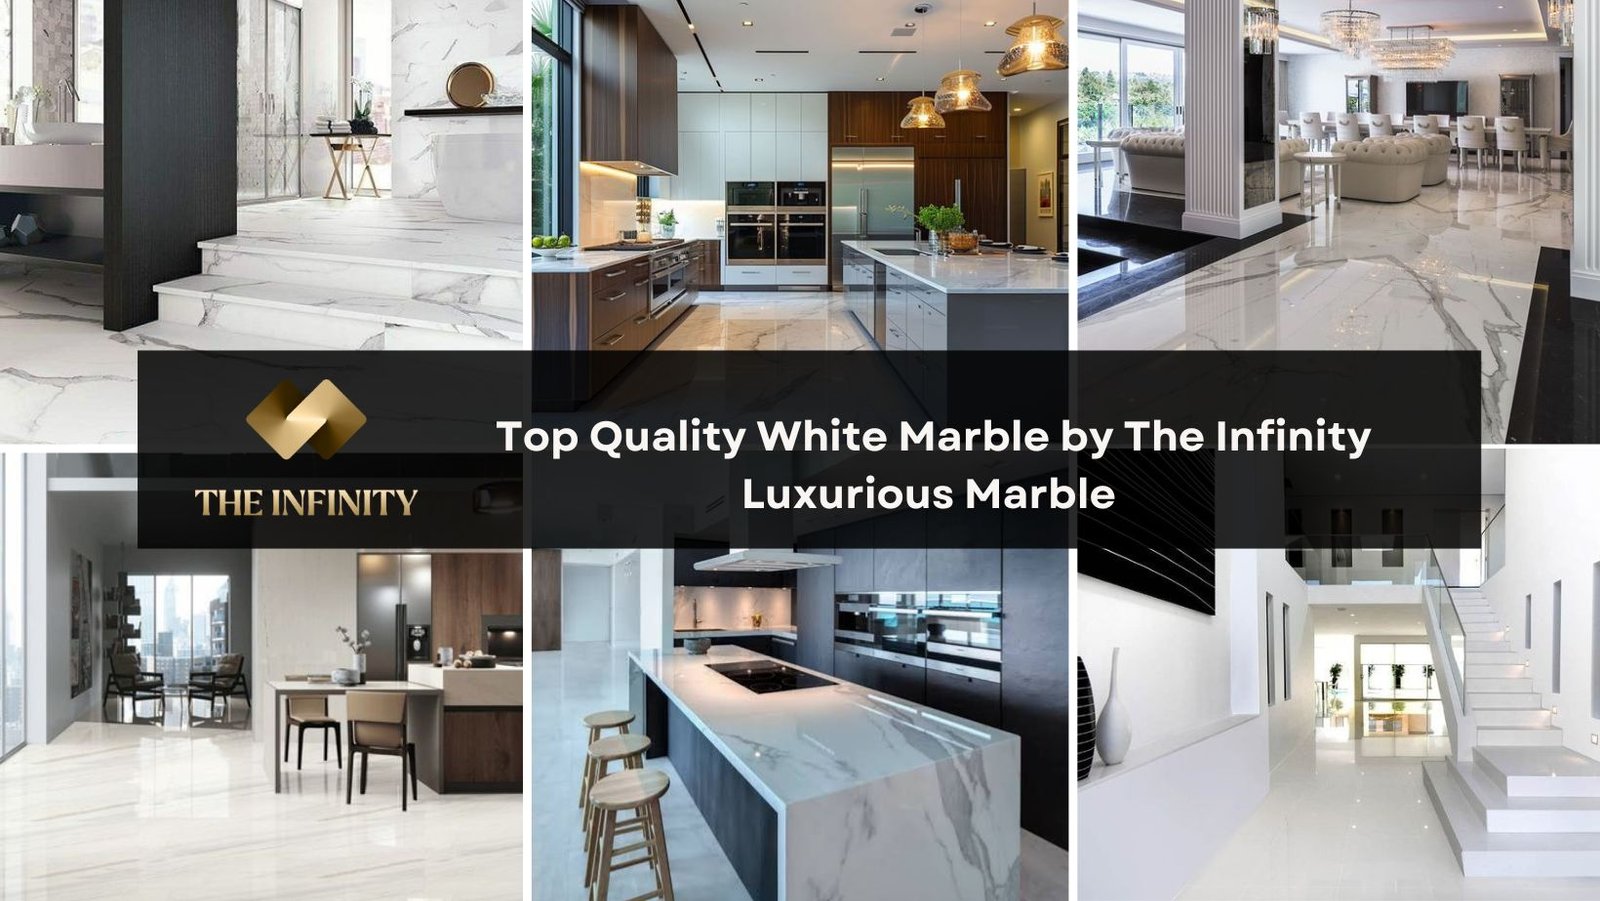 Top Quality White Marble by The Infinity Luxurious Marble